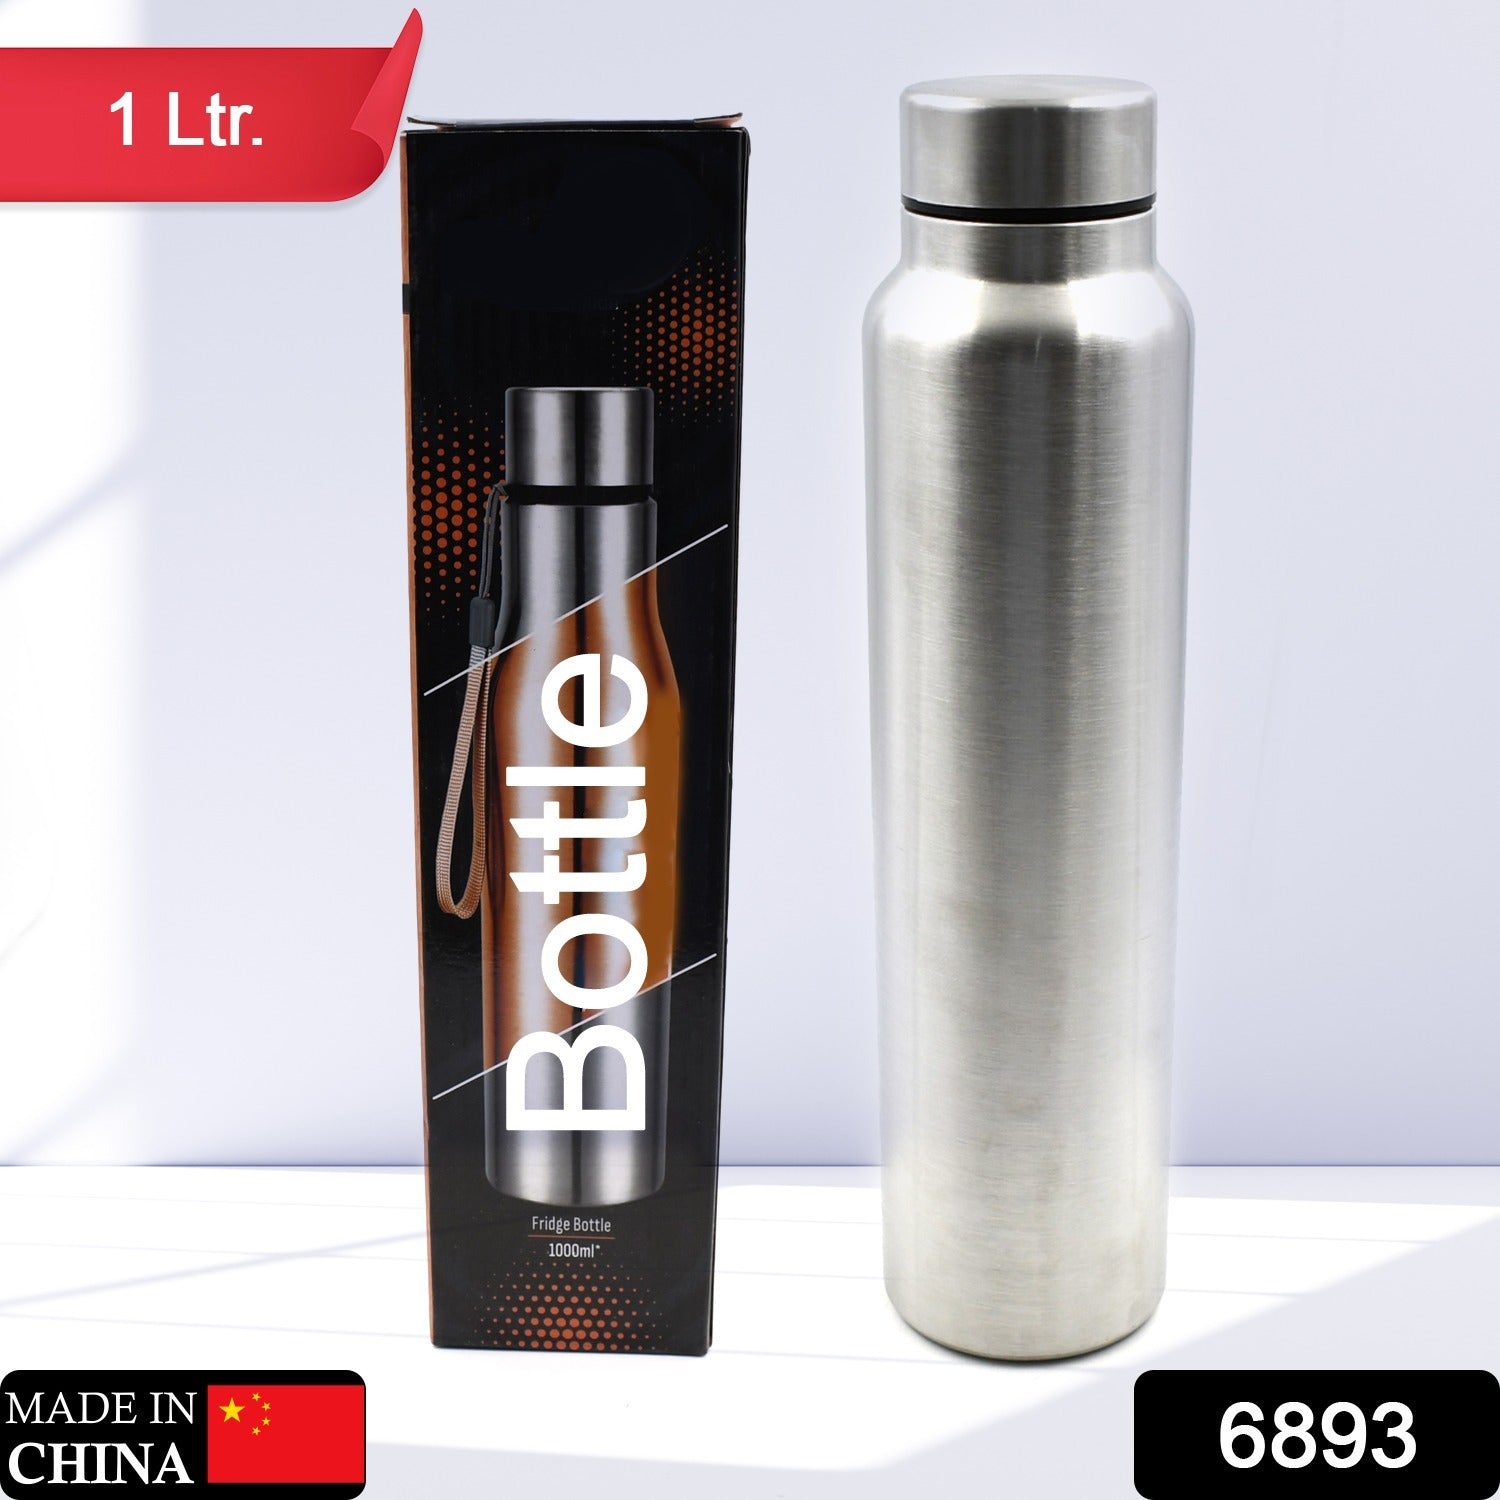 Fridge Water Bottle, Stainless Steel Water Bottles, Flasks for Tea Coffee, Hot & Cold Drinks, BPA Free, Leakproof, Portable For office/Gym/School 1000 ML